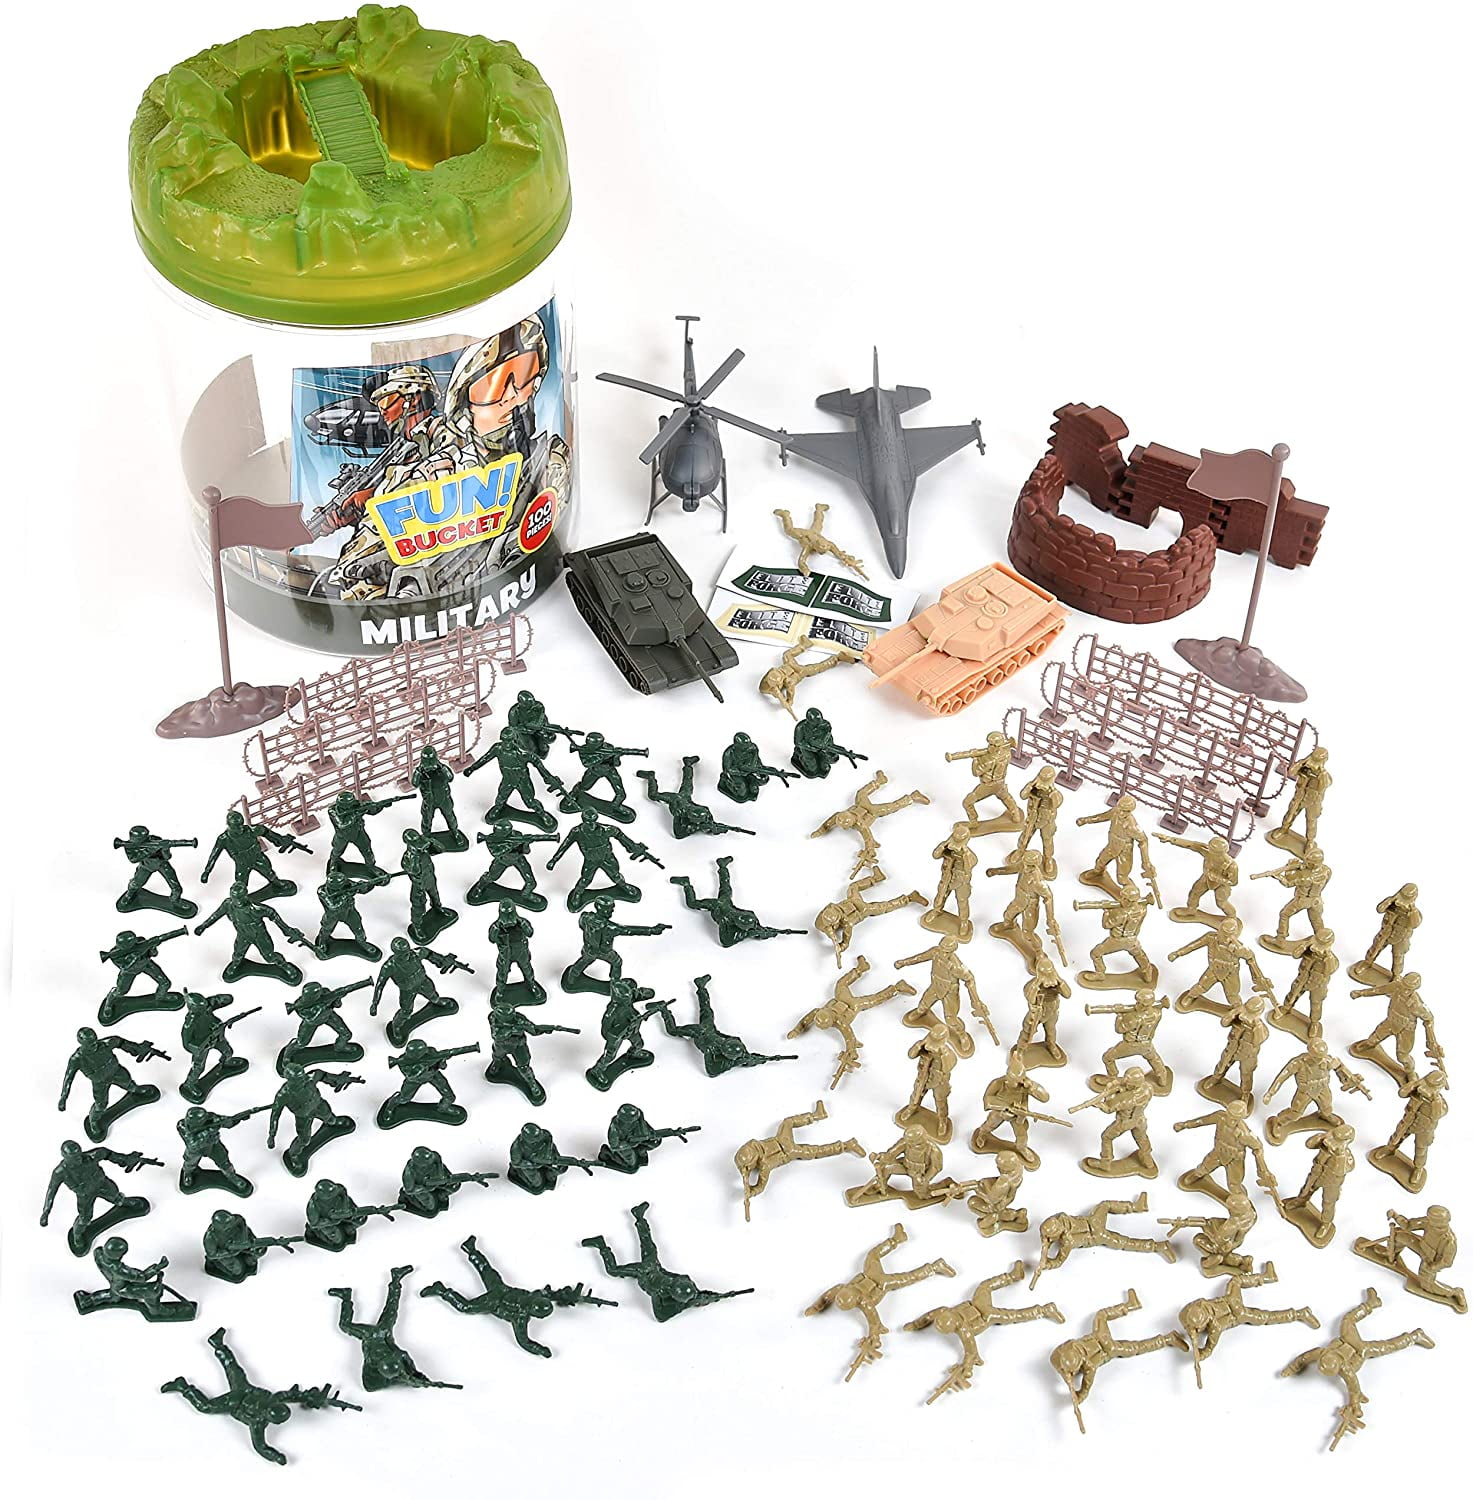 Toyvian 100pcs Military Soldier Playset Army Men Military Base Battlefield Accessories Playset for Toddlers Kids Children